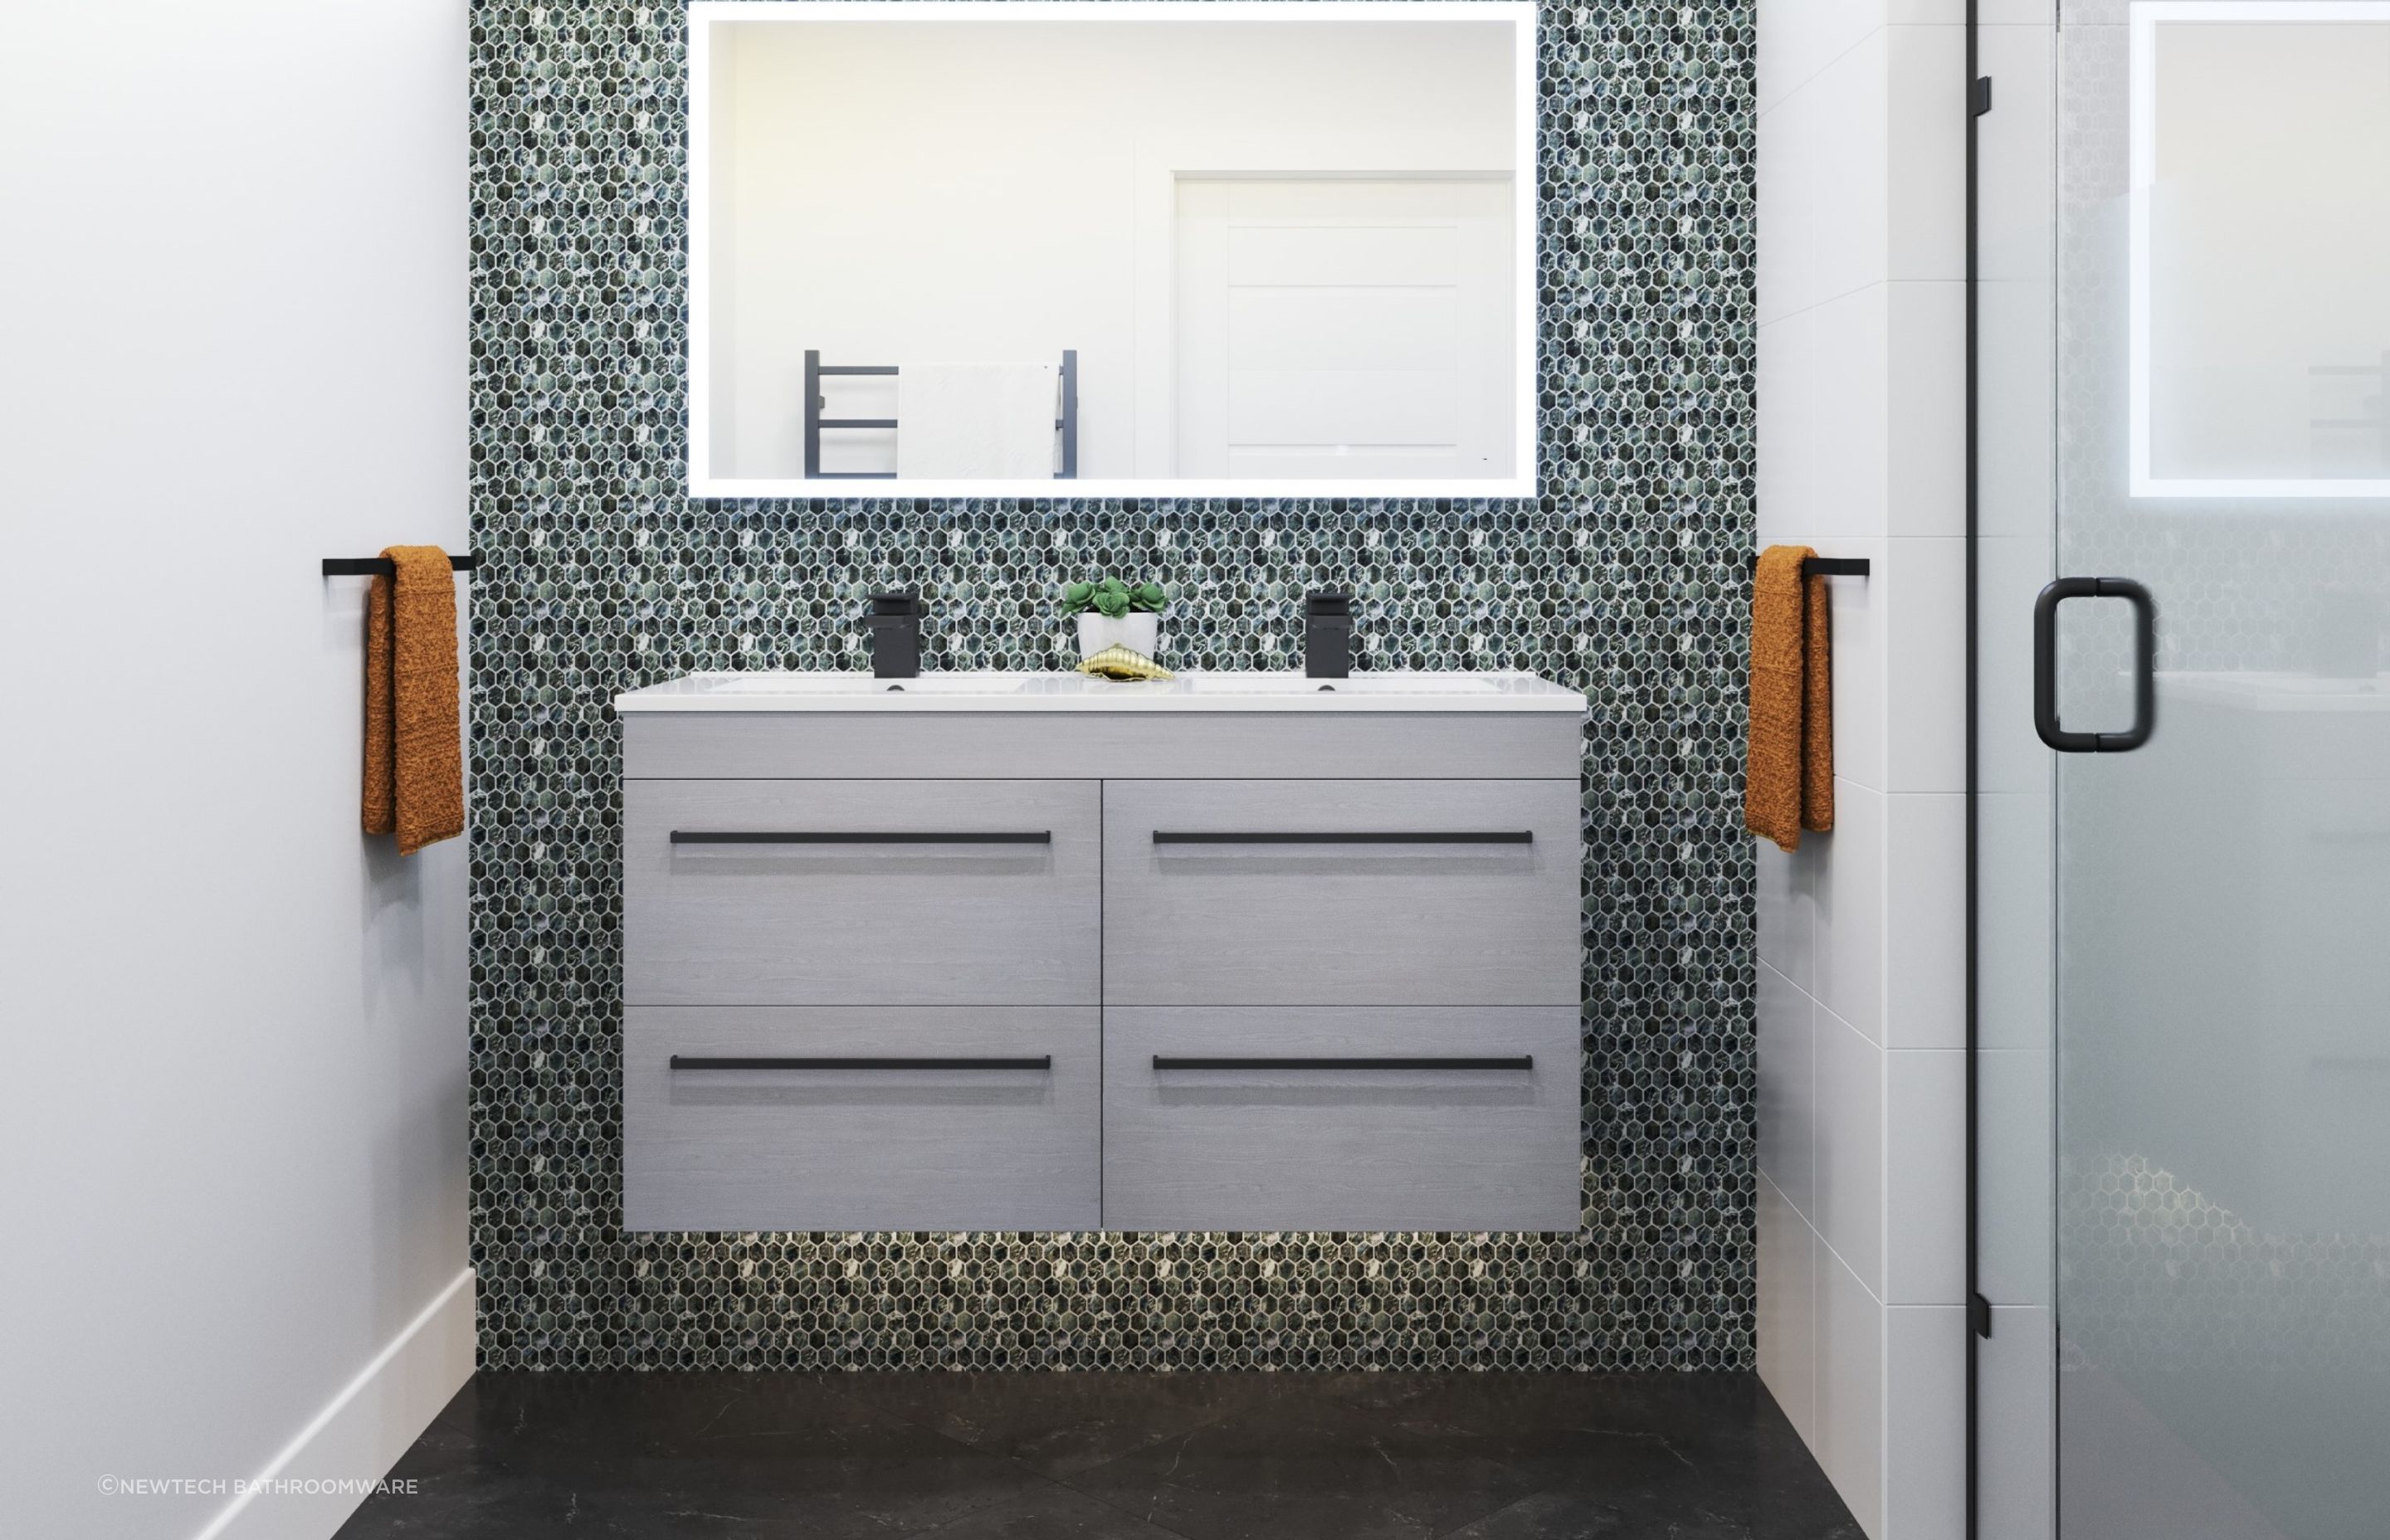 A floating vanity like the 3182 Citi Double Height Wall Hung Vanity, enhances the illusion of space.